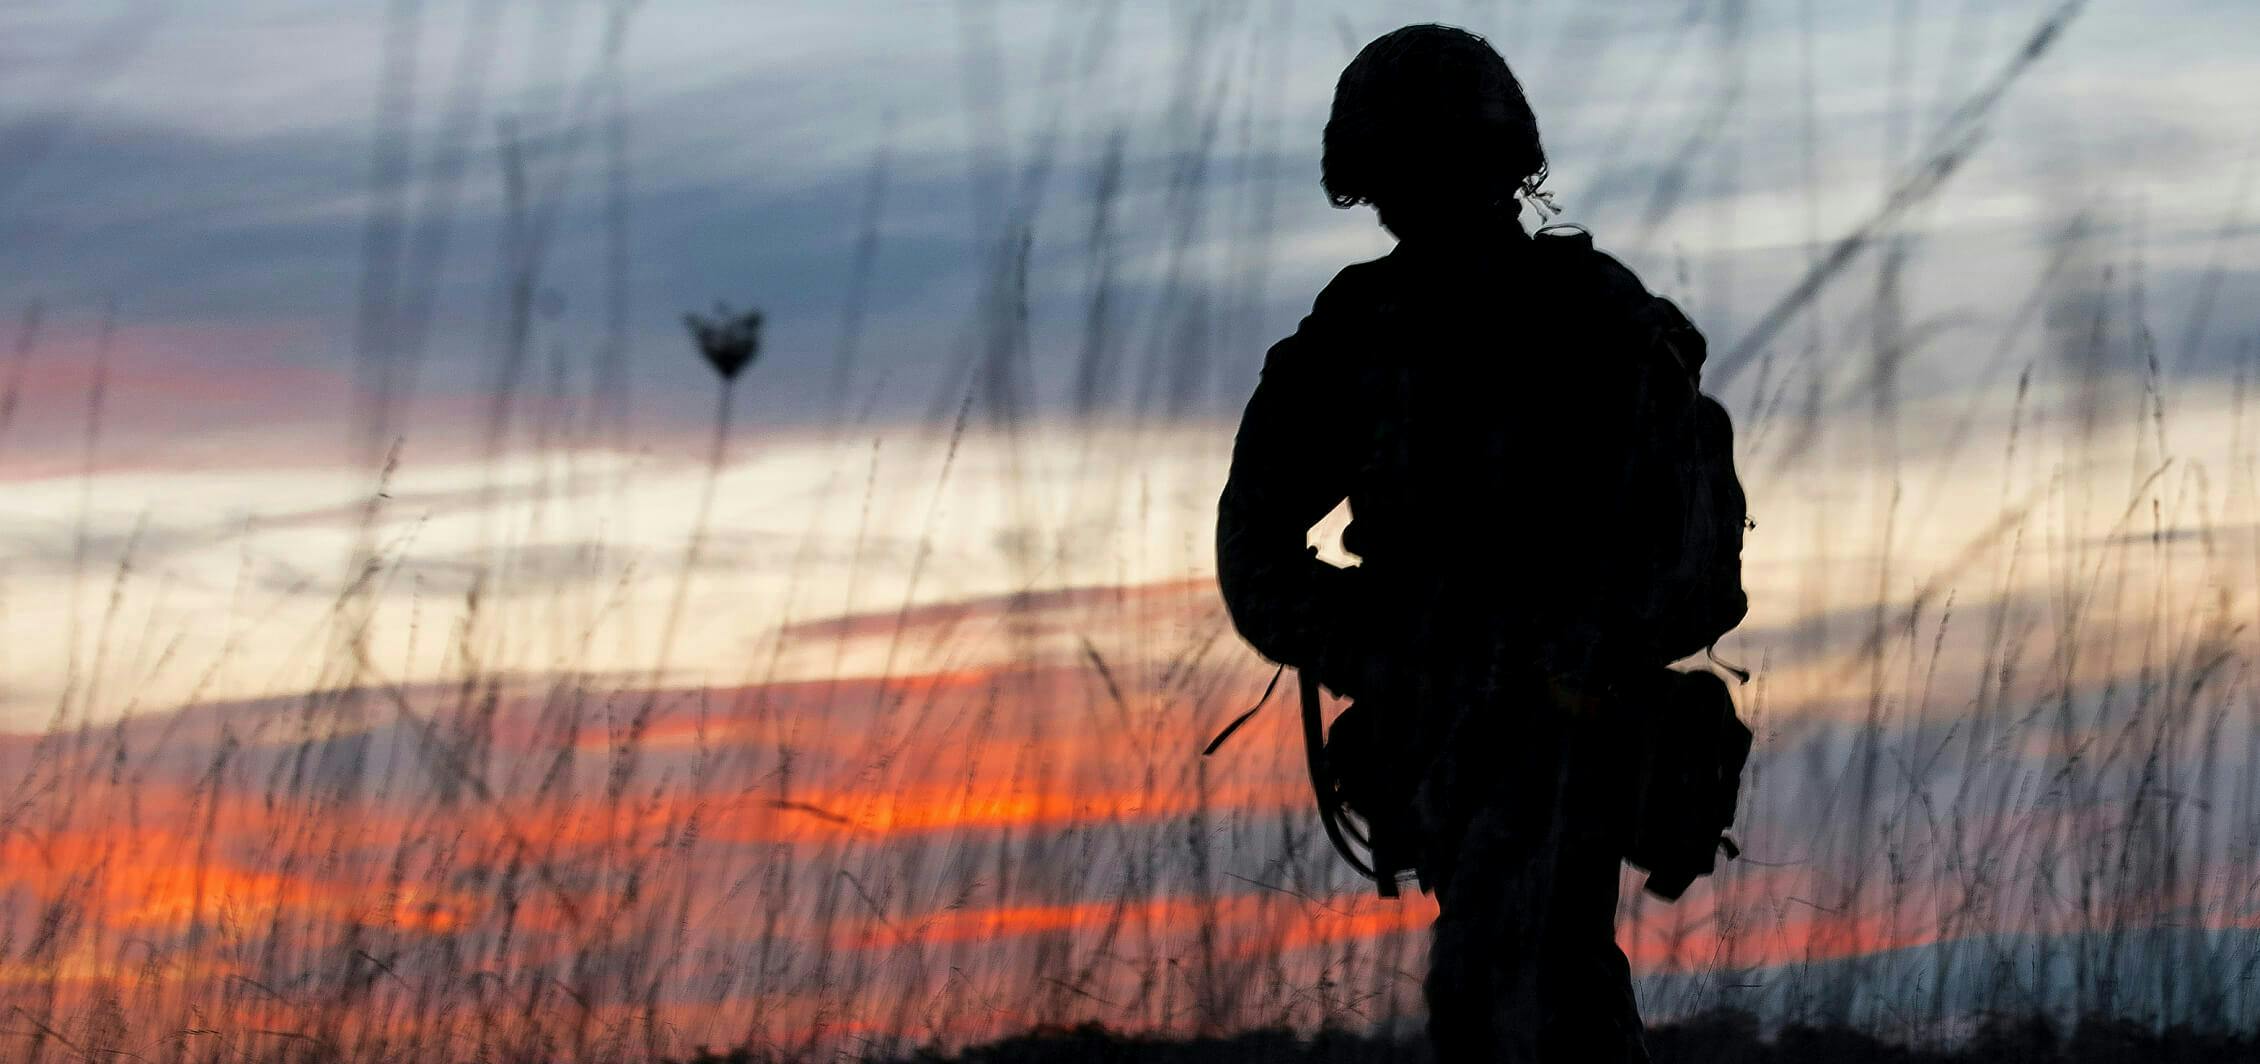 Silhouette of a solider at sunrise 